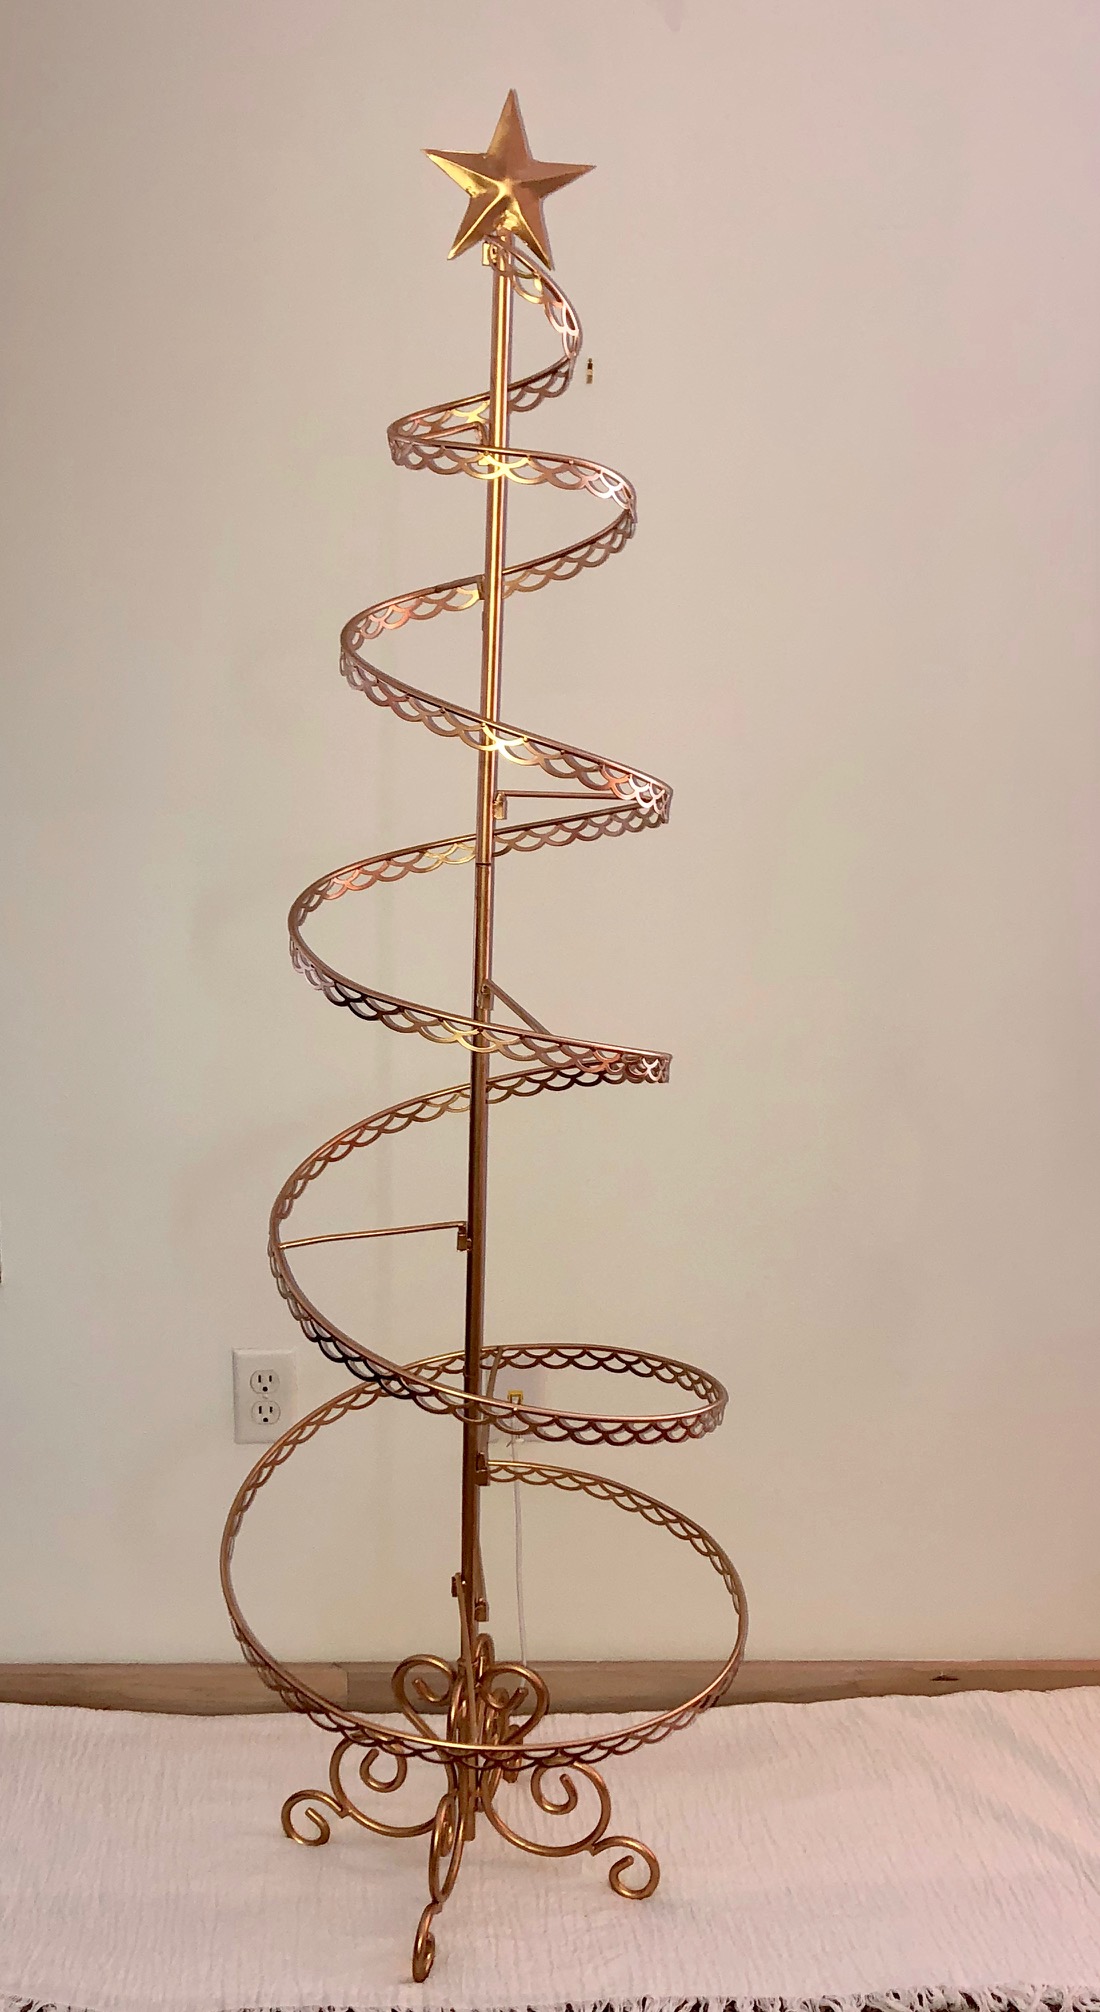 Ornament Trees - Spiral Wire Ornament Tree - 6 Foot